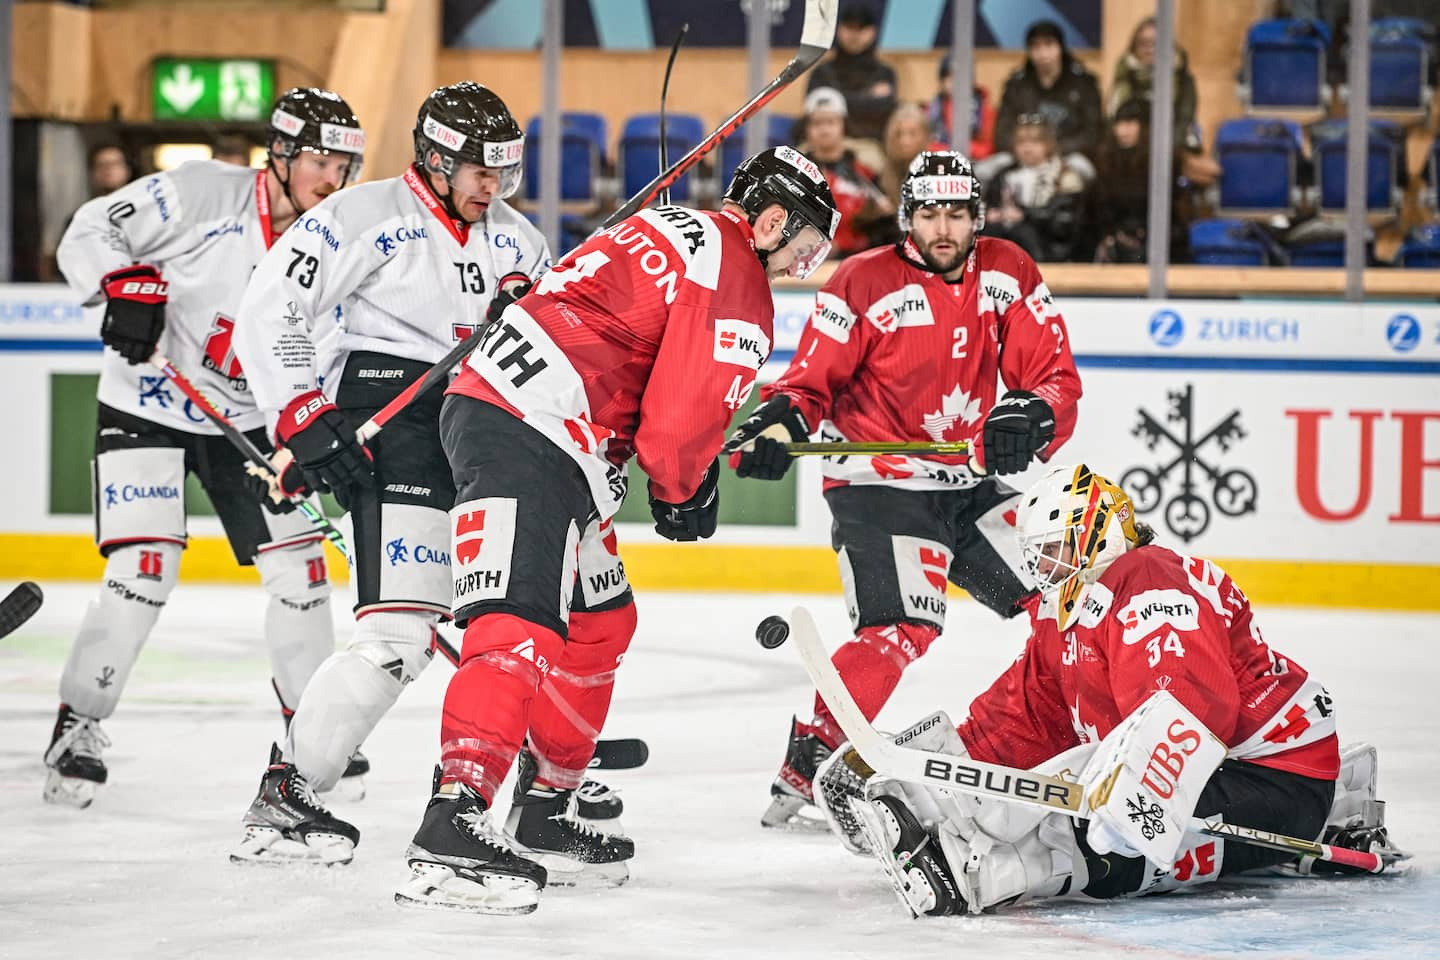 Spengler Cup: Canada's miserable tournament already over